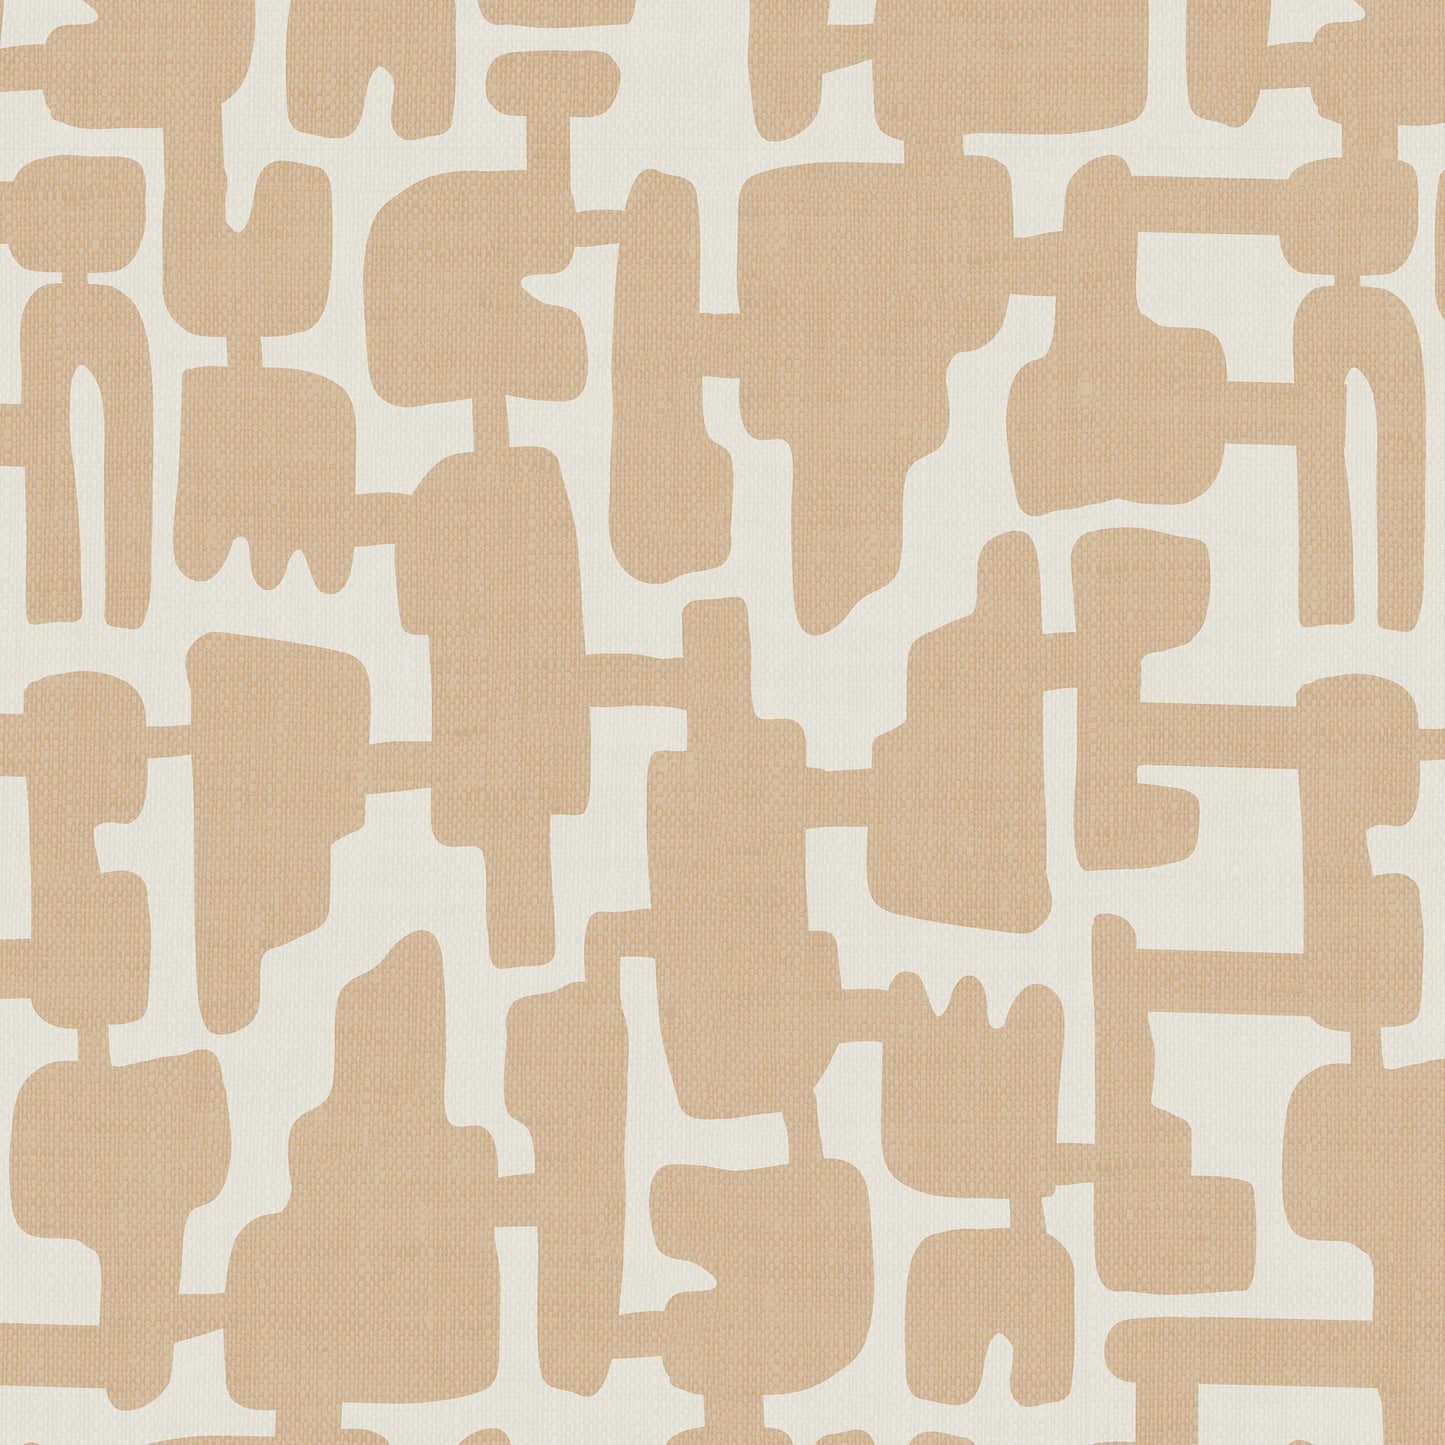 Add some eye-catching style to your walls with our Abstract Shapes Wallpaper! This modern design features an intricate blend of beige shapes on a beige on cream background.